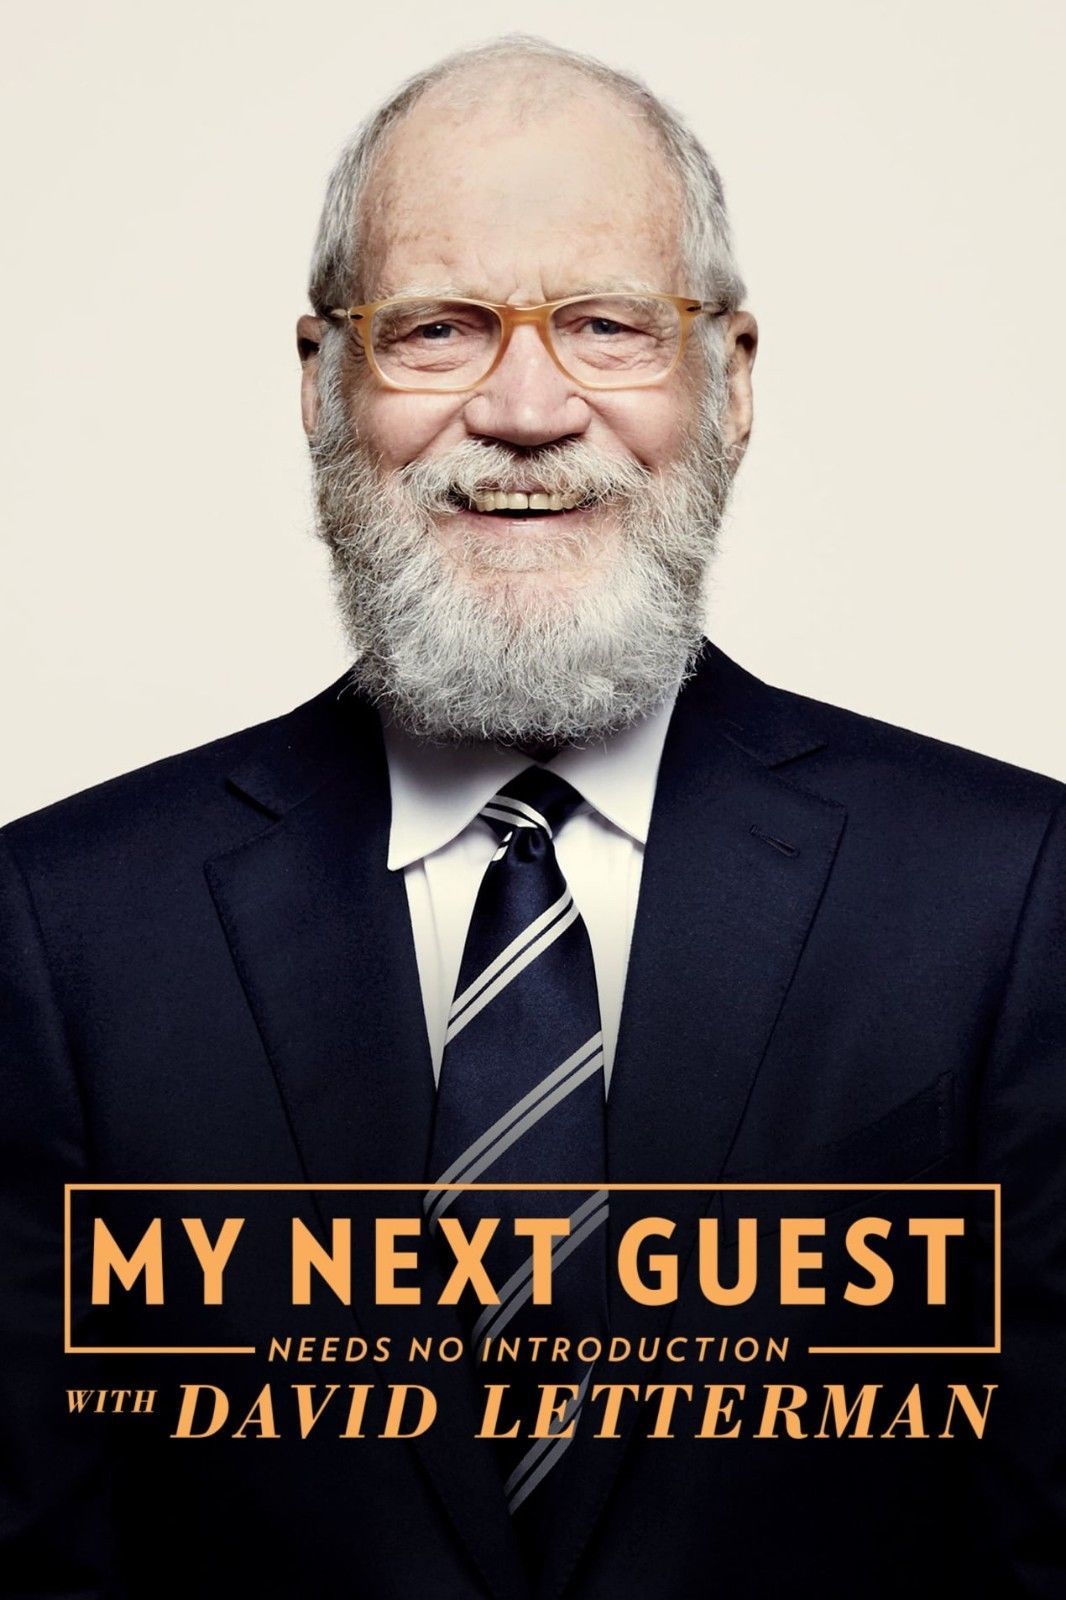 My Next Guest Needs No Introduction With David Letterman TV Series Poster 24X36" - $11.90 - $24.90